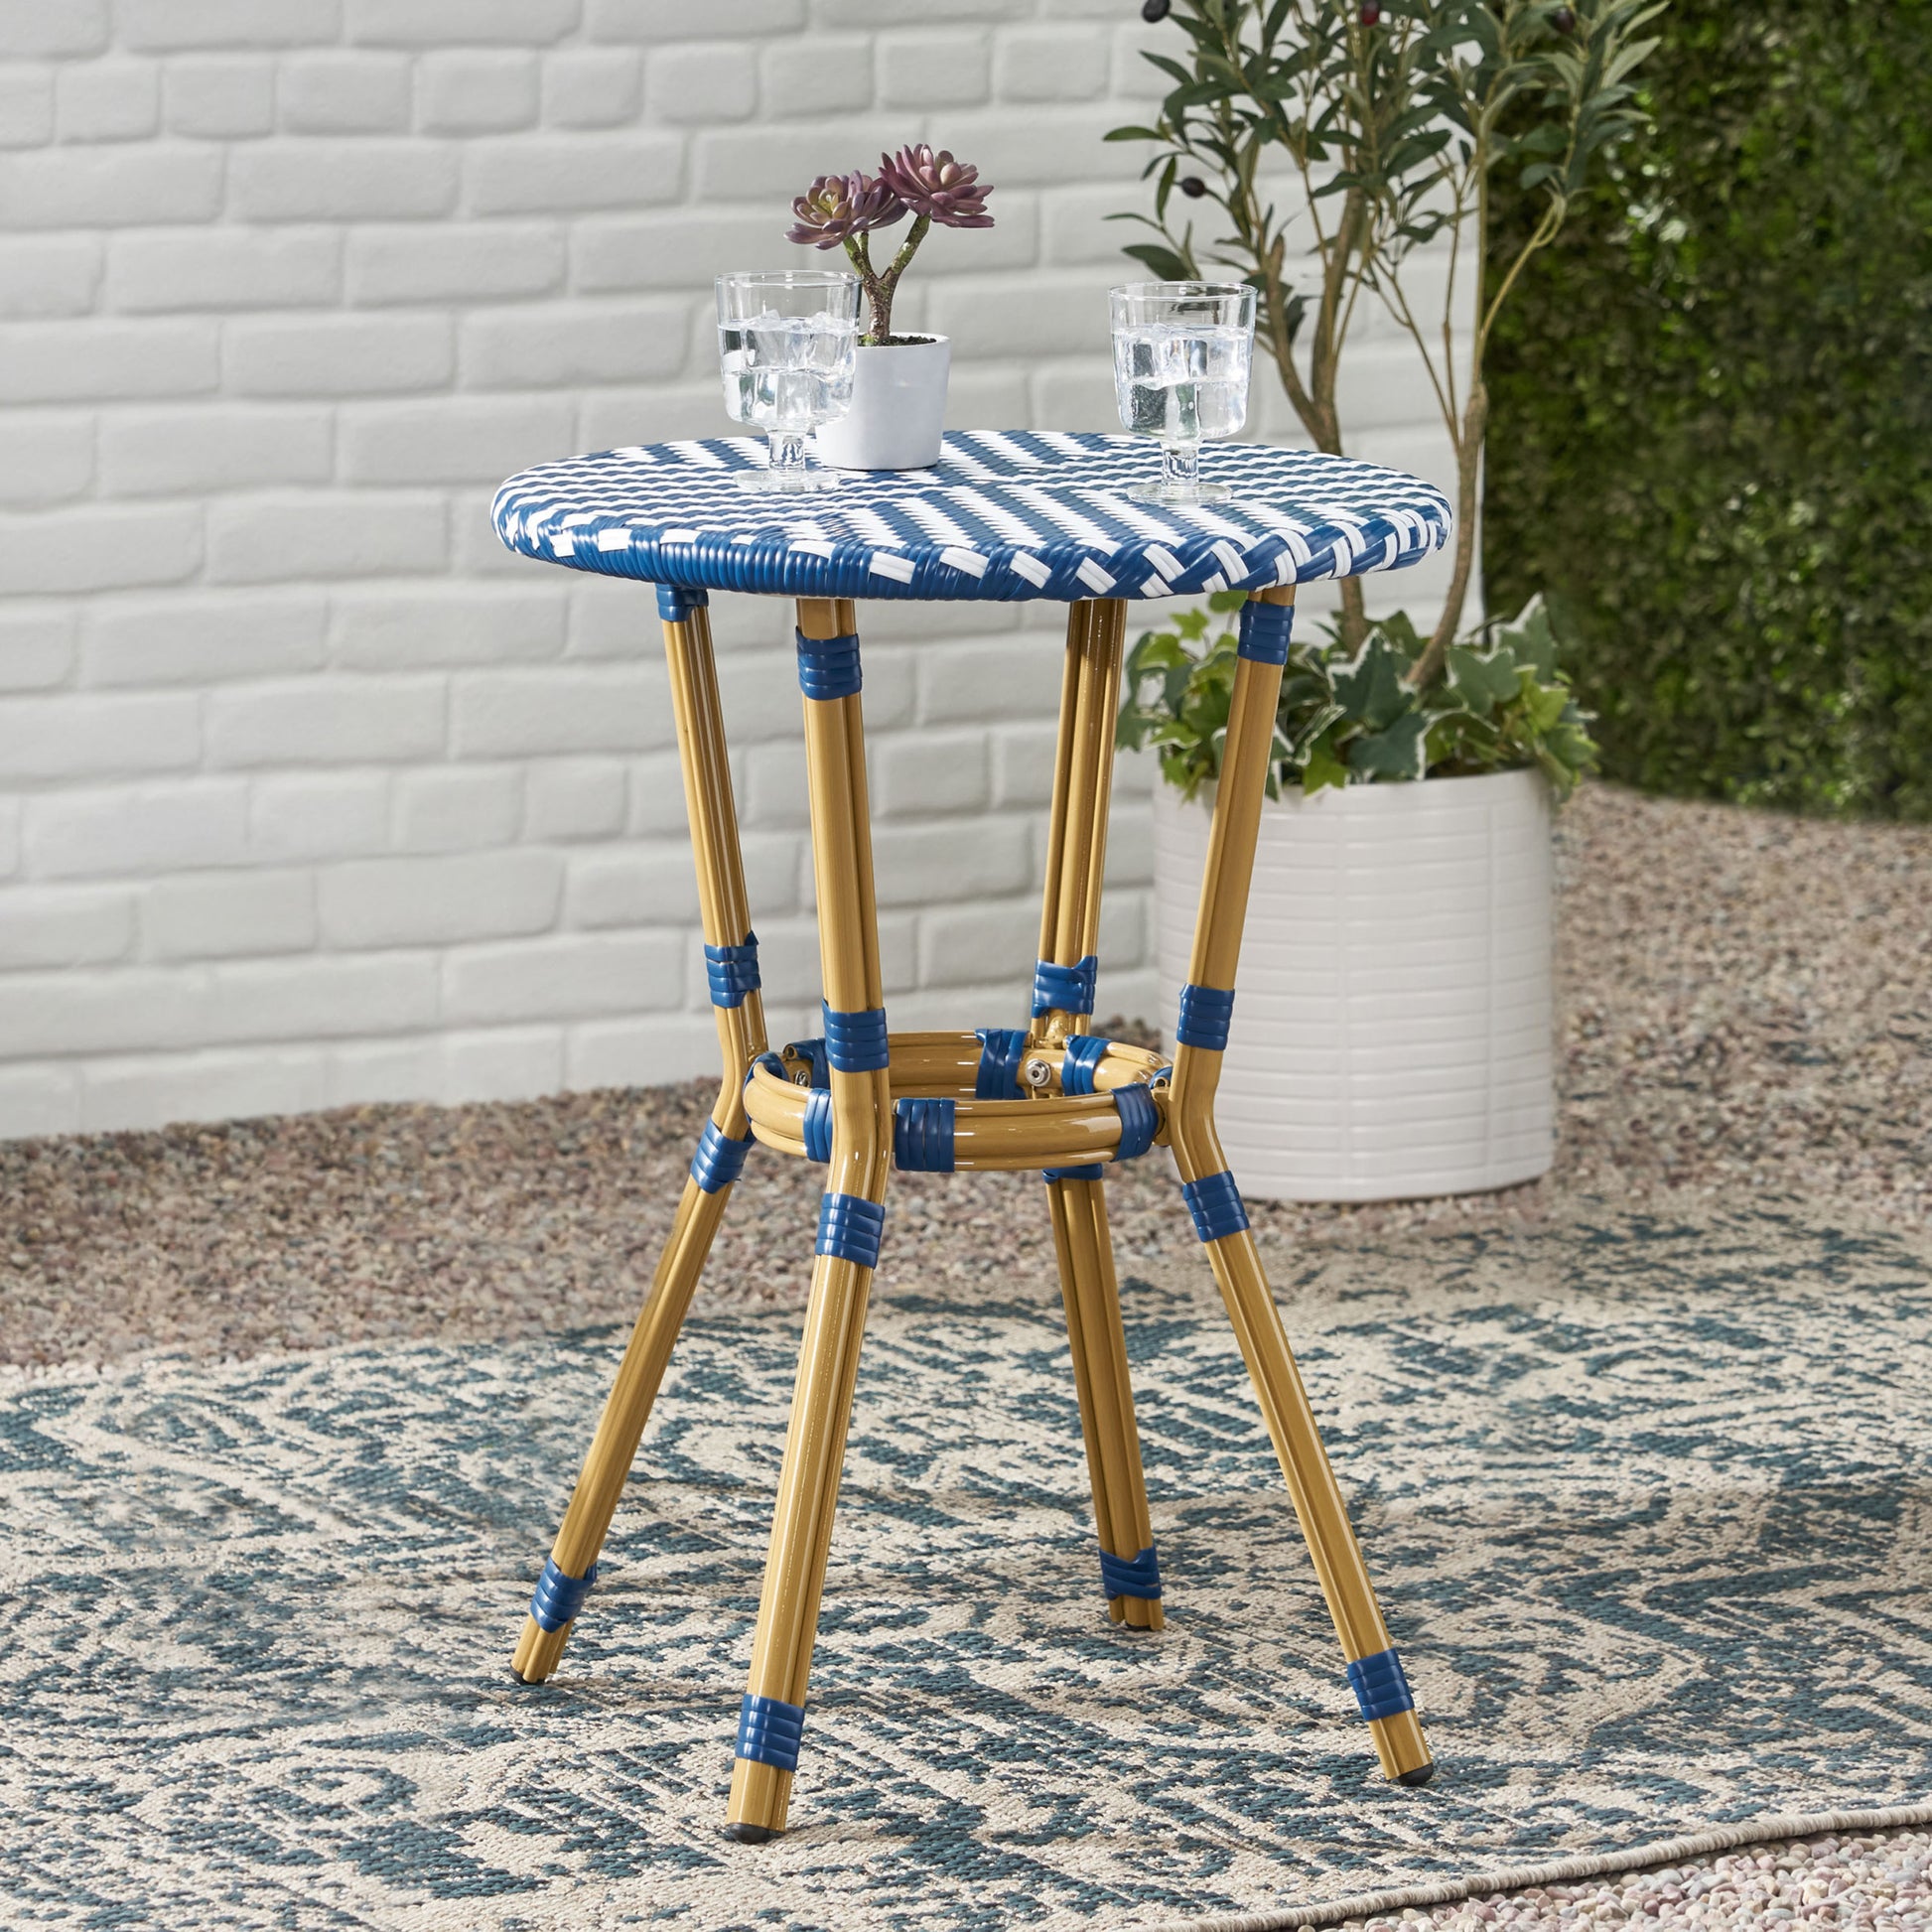 French Bistro Table - White Blue Rattan